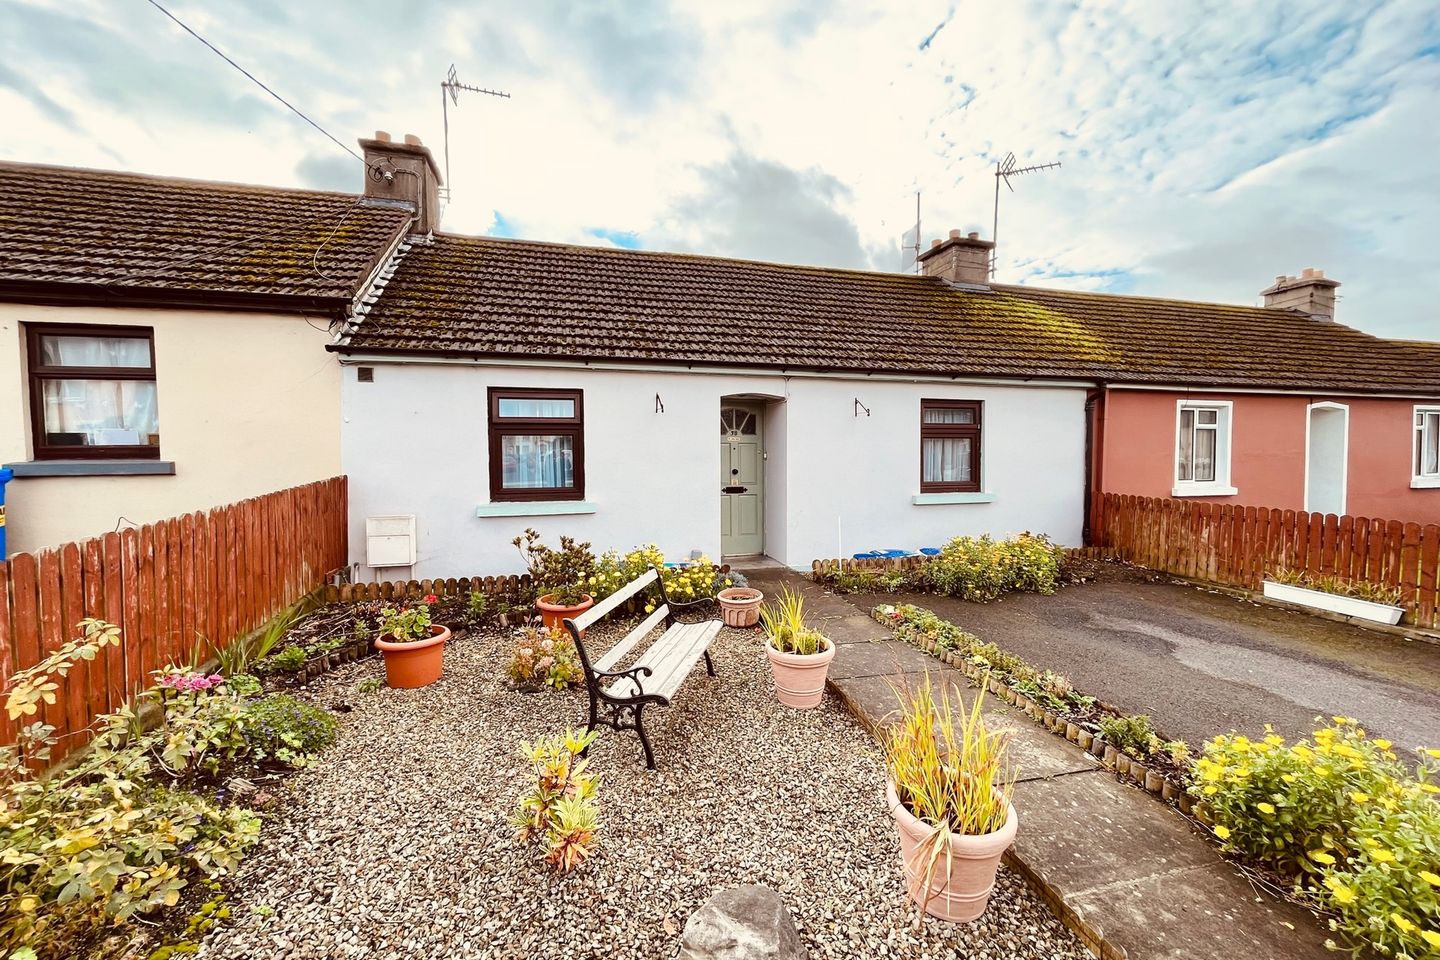 38 Cashel Road, Tipperary Town, Co. Tipperary